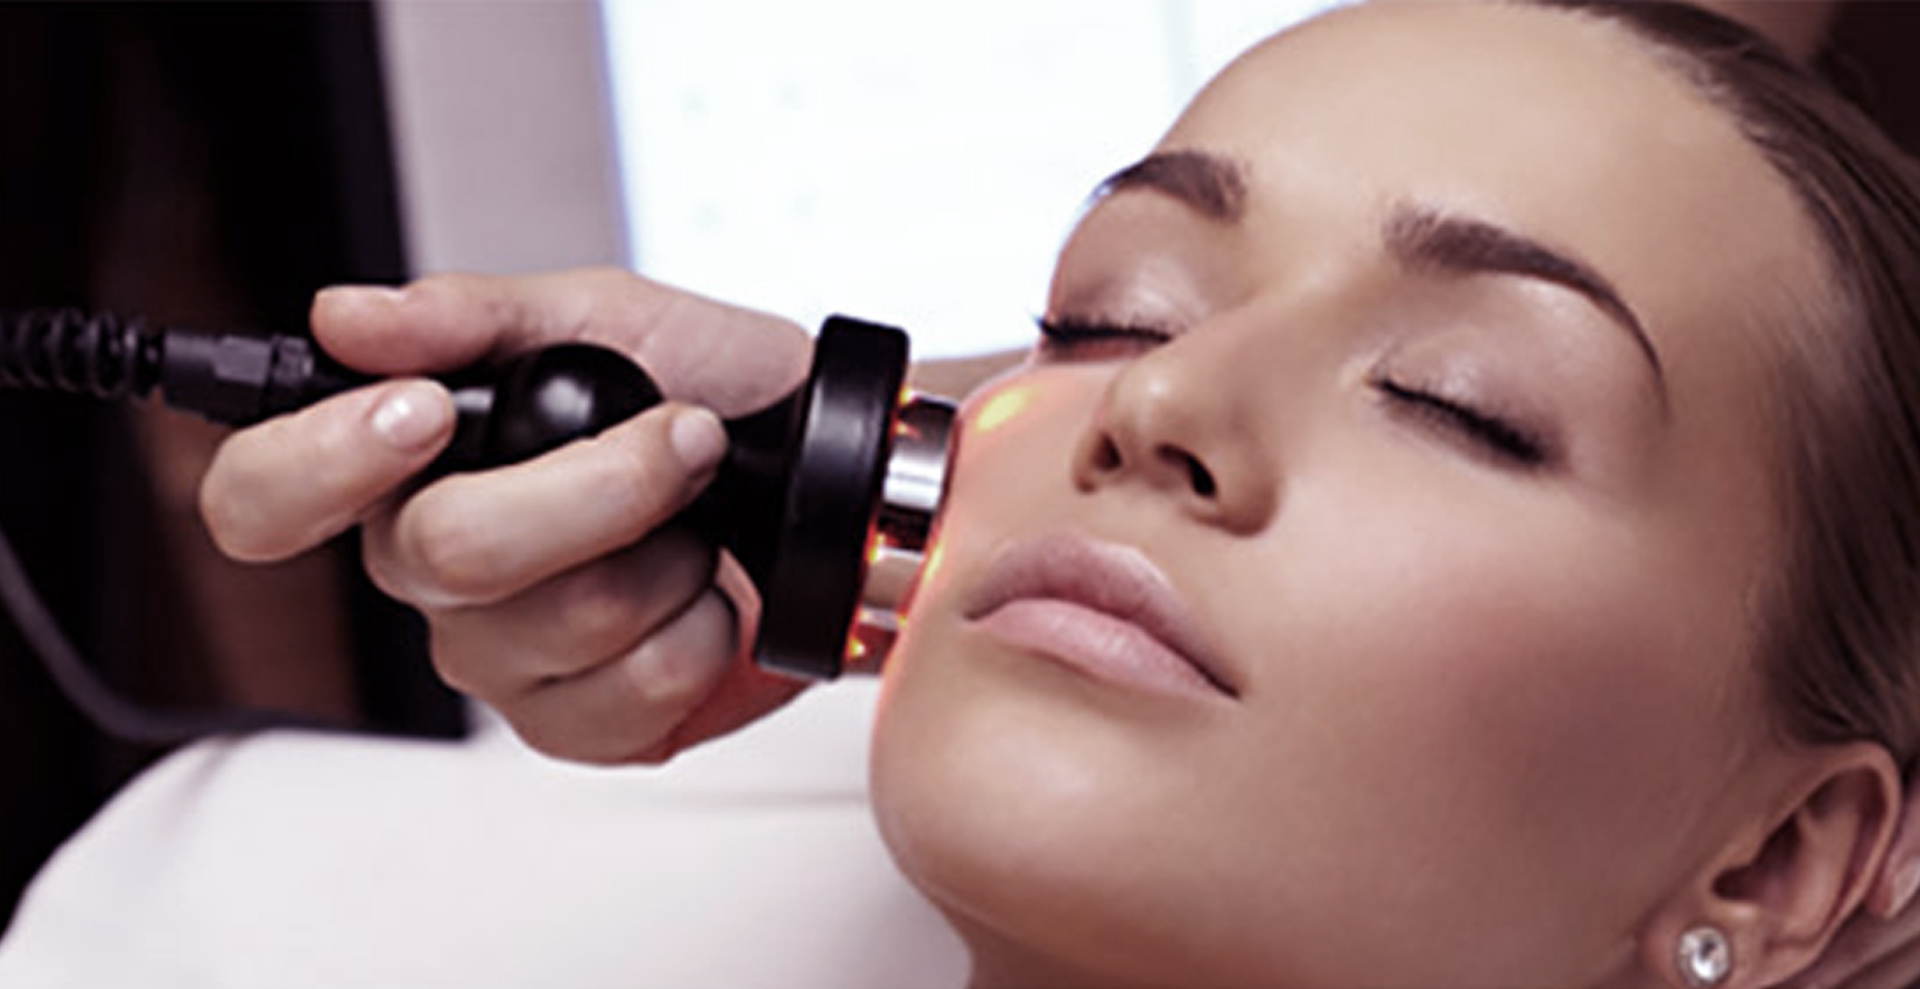 dermatology-and-cosmetology-treatments-services